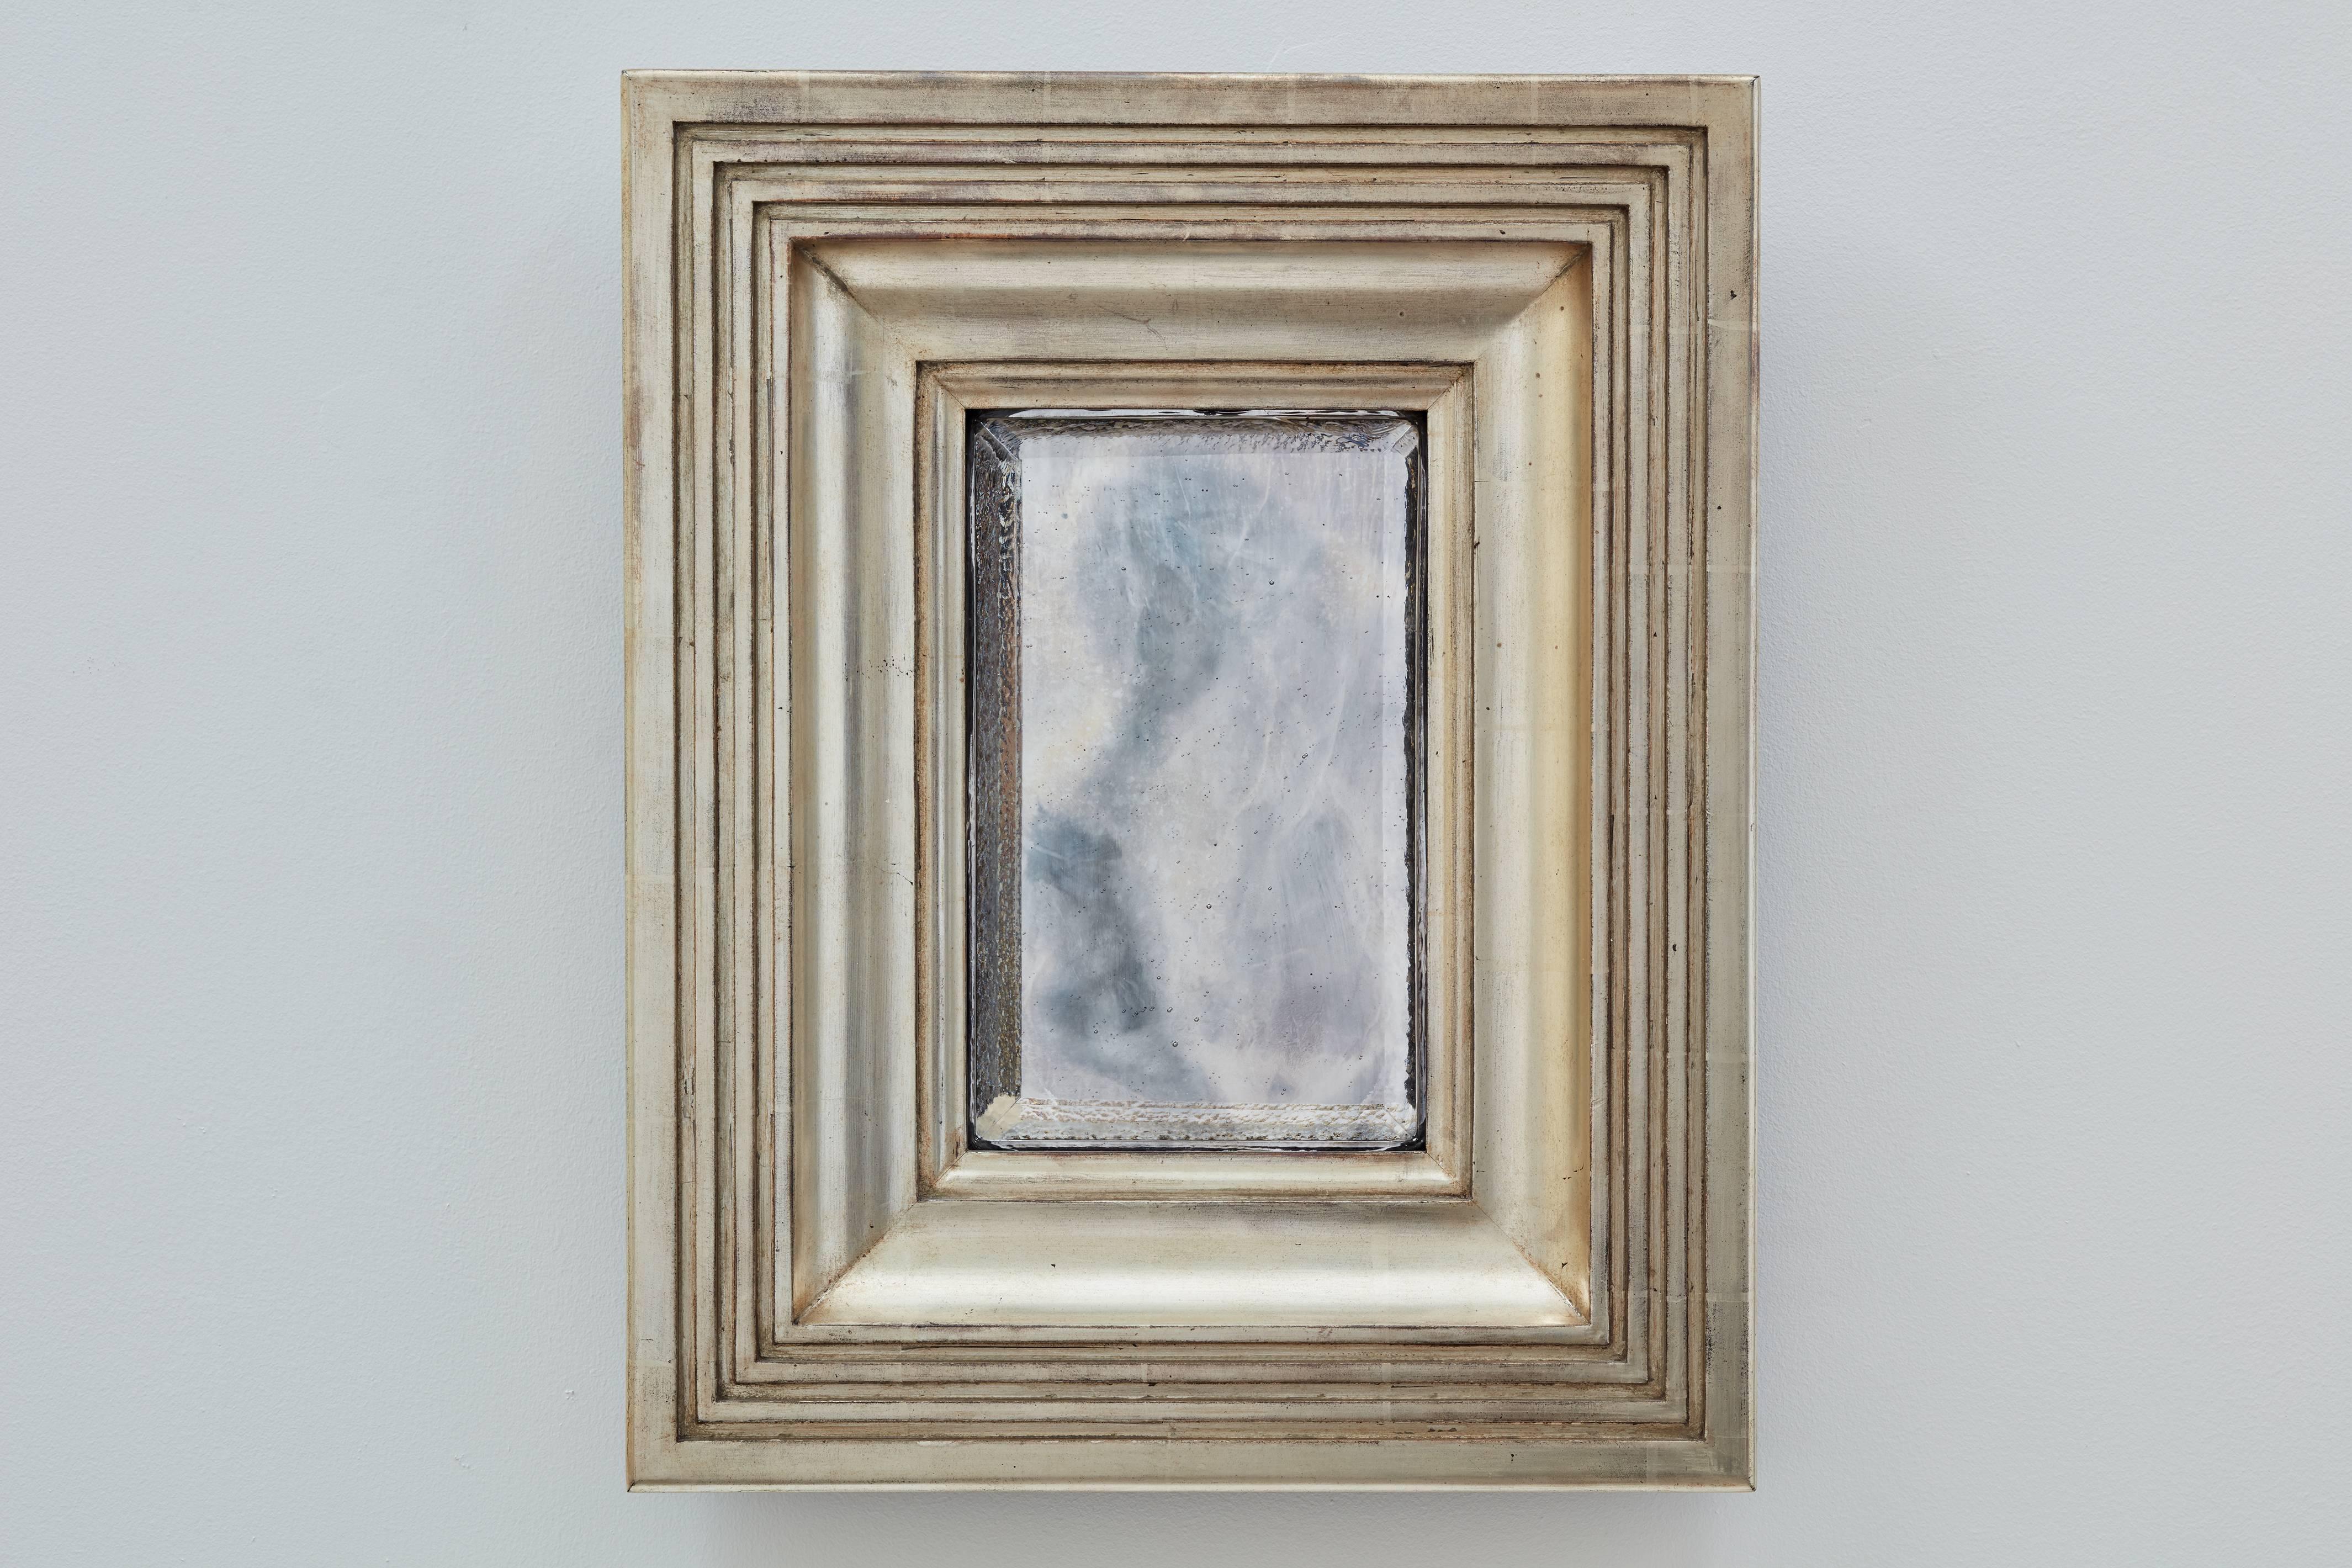 The Degas No. 4 mirror by Bark Frameworks. Degas is based on a design by Impressionist painter Edgar Degas (1834-1917), from his notebooks of 1878-1879. The frame, which has exaggerates flutes and reed on its sides, is gilded in 12-karat white gold